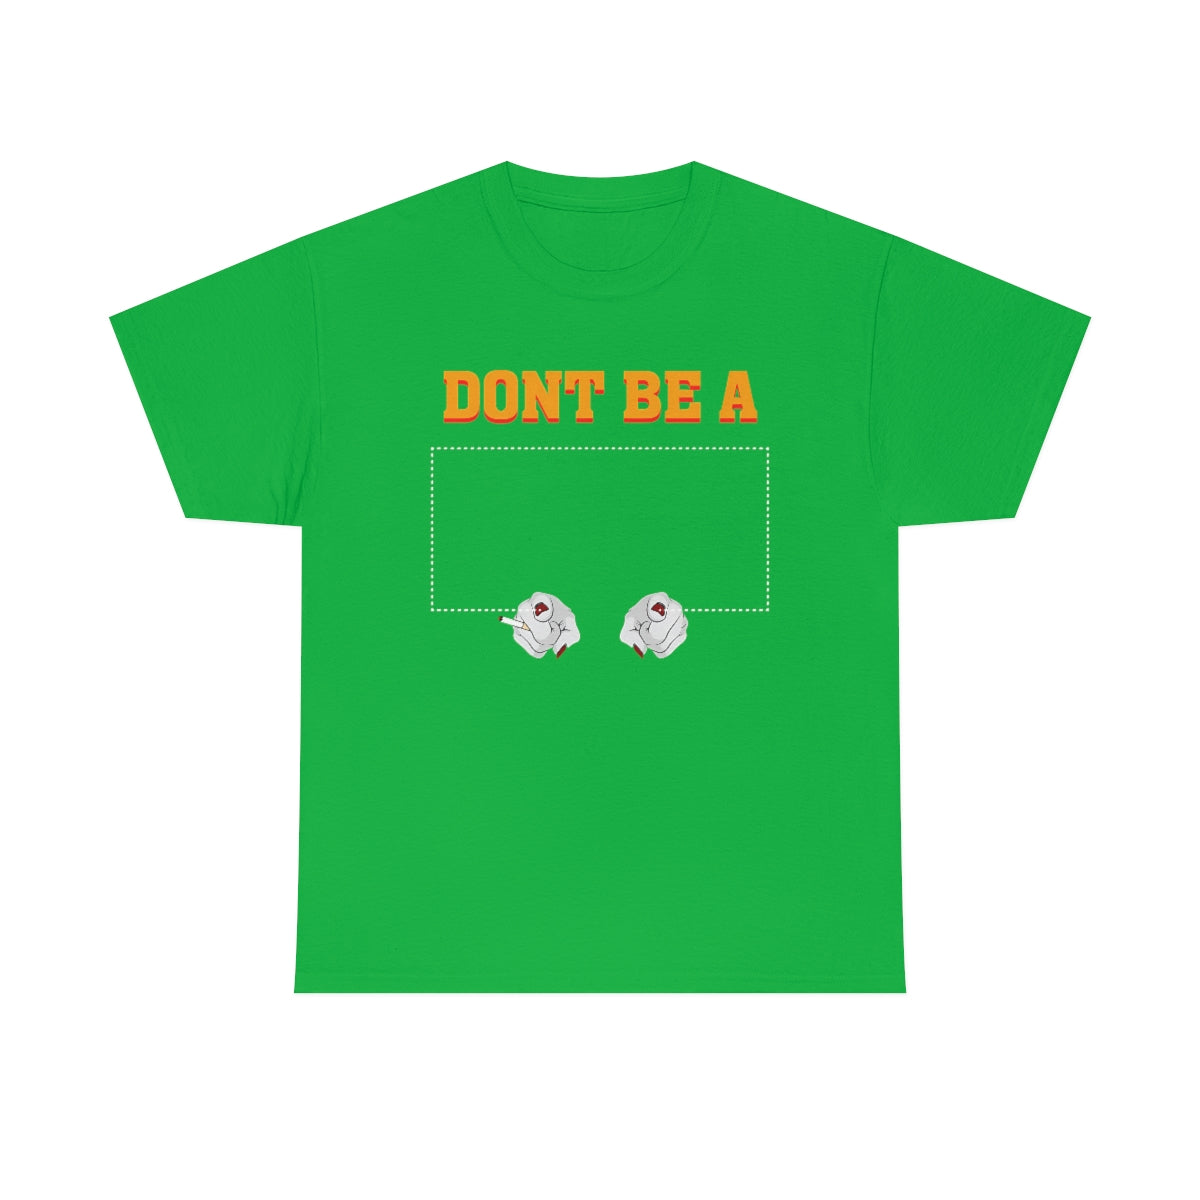 Pulp Fiction - Don't be a Square T-Shirt